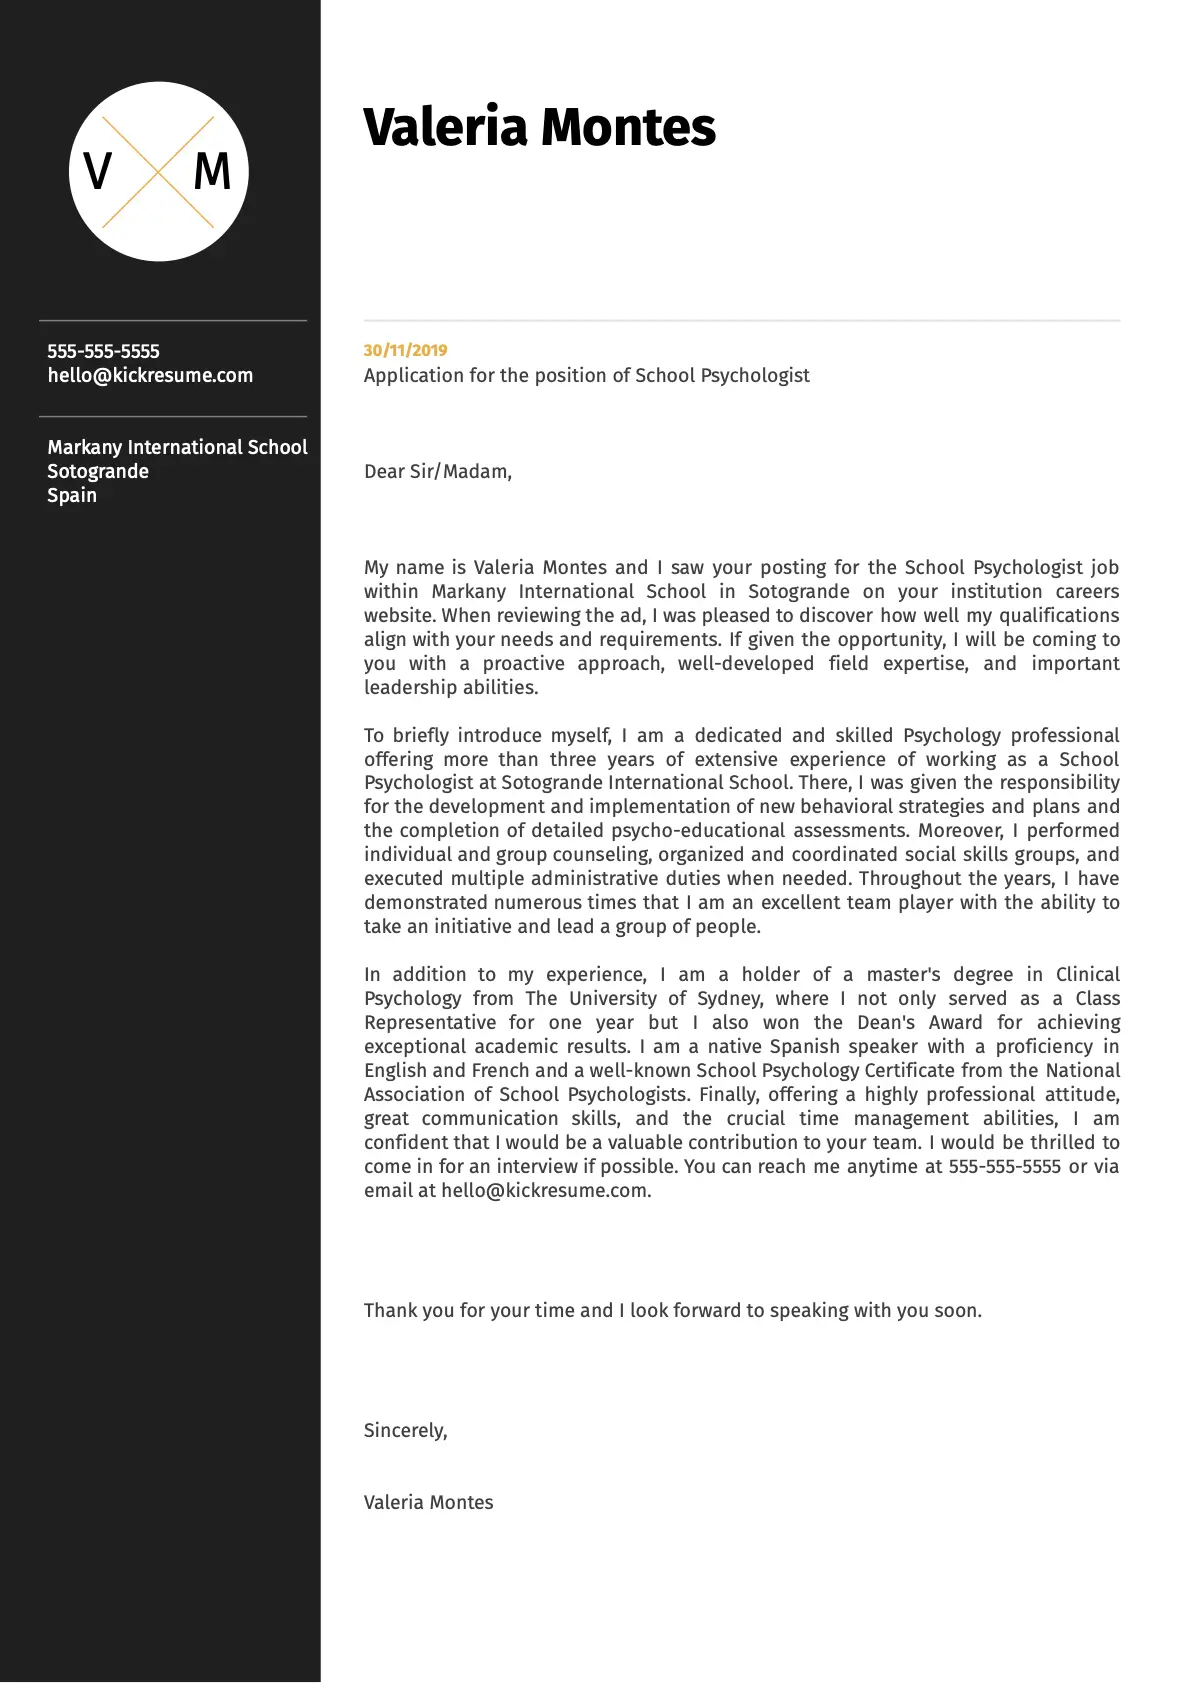 School psychologist cover letter example